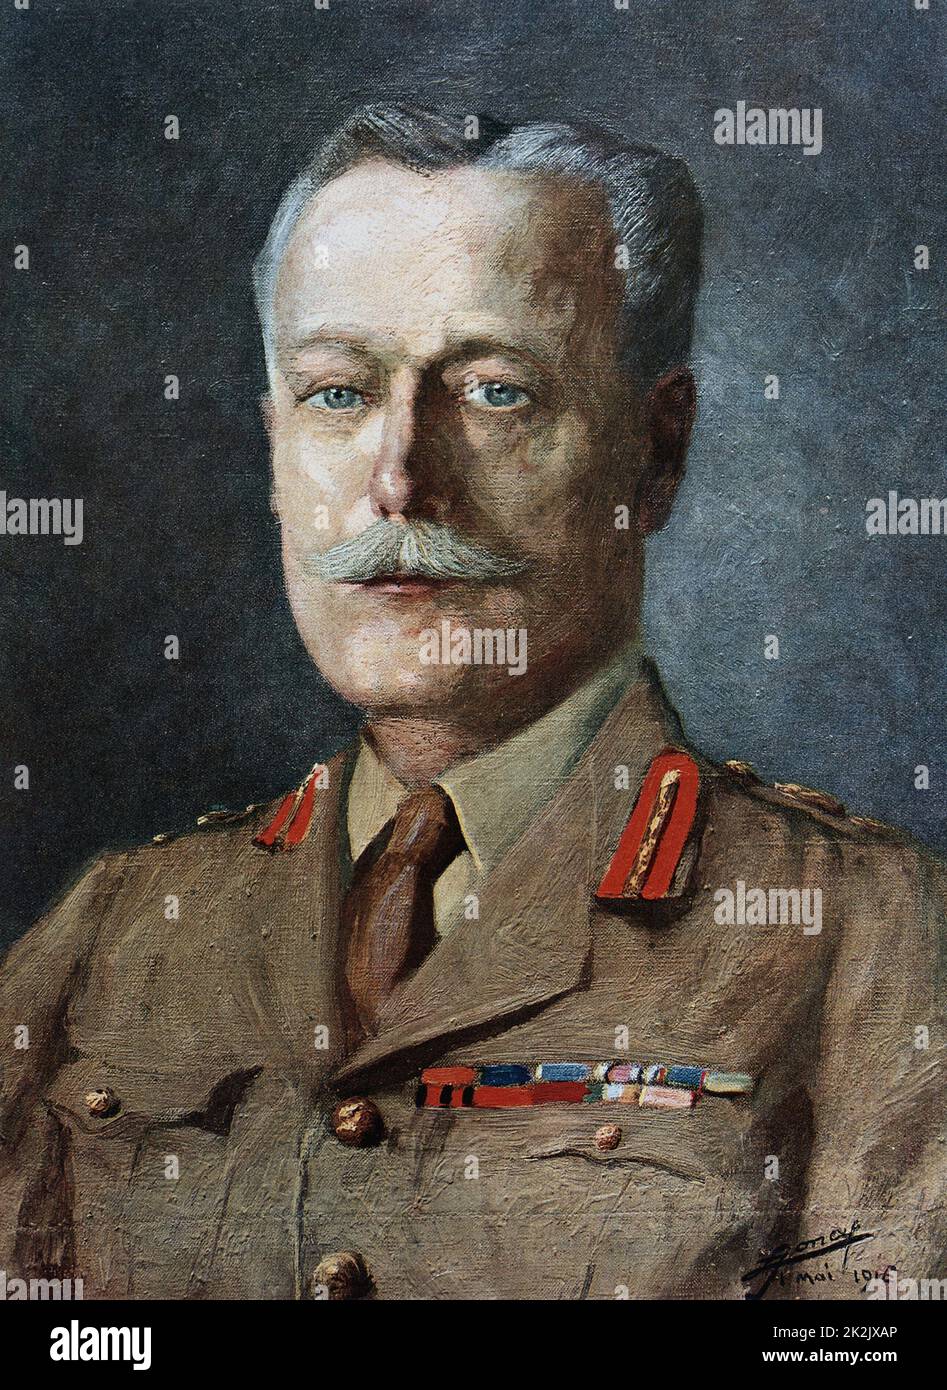 Douglas Haig (1861-1928) Scottish-born British soldier. Commander-in-Chief British forces in France from 1915. Haig in 1916 Stock Photo